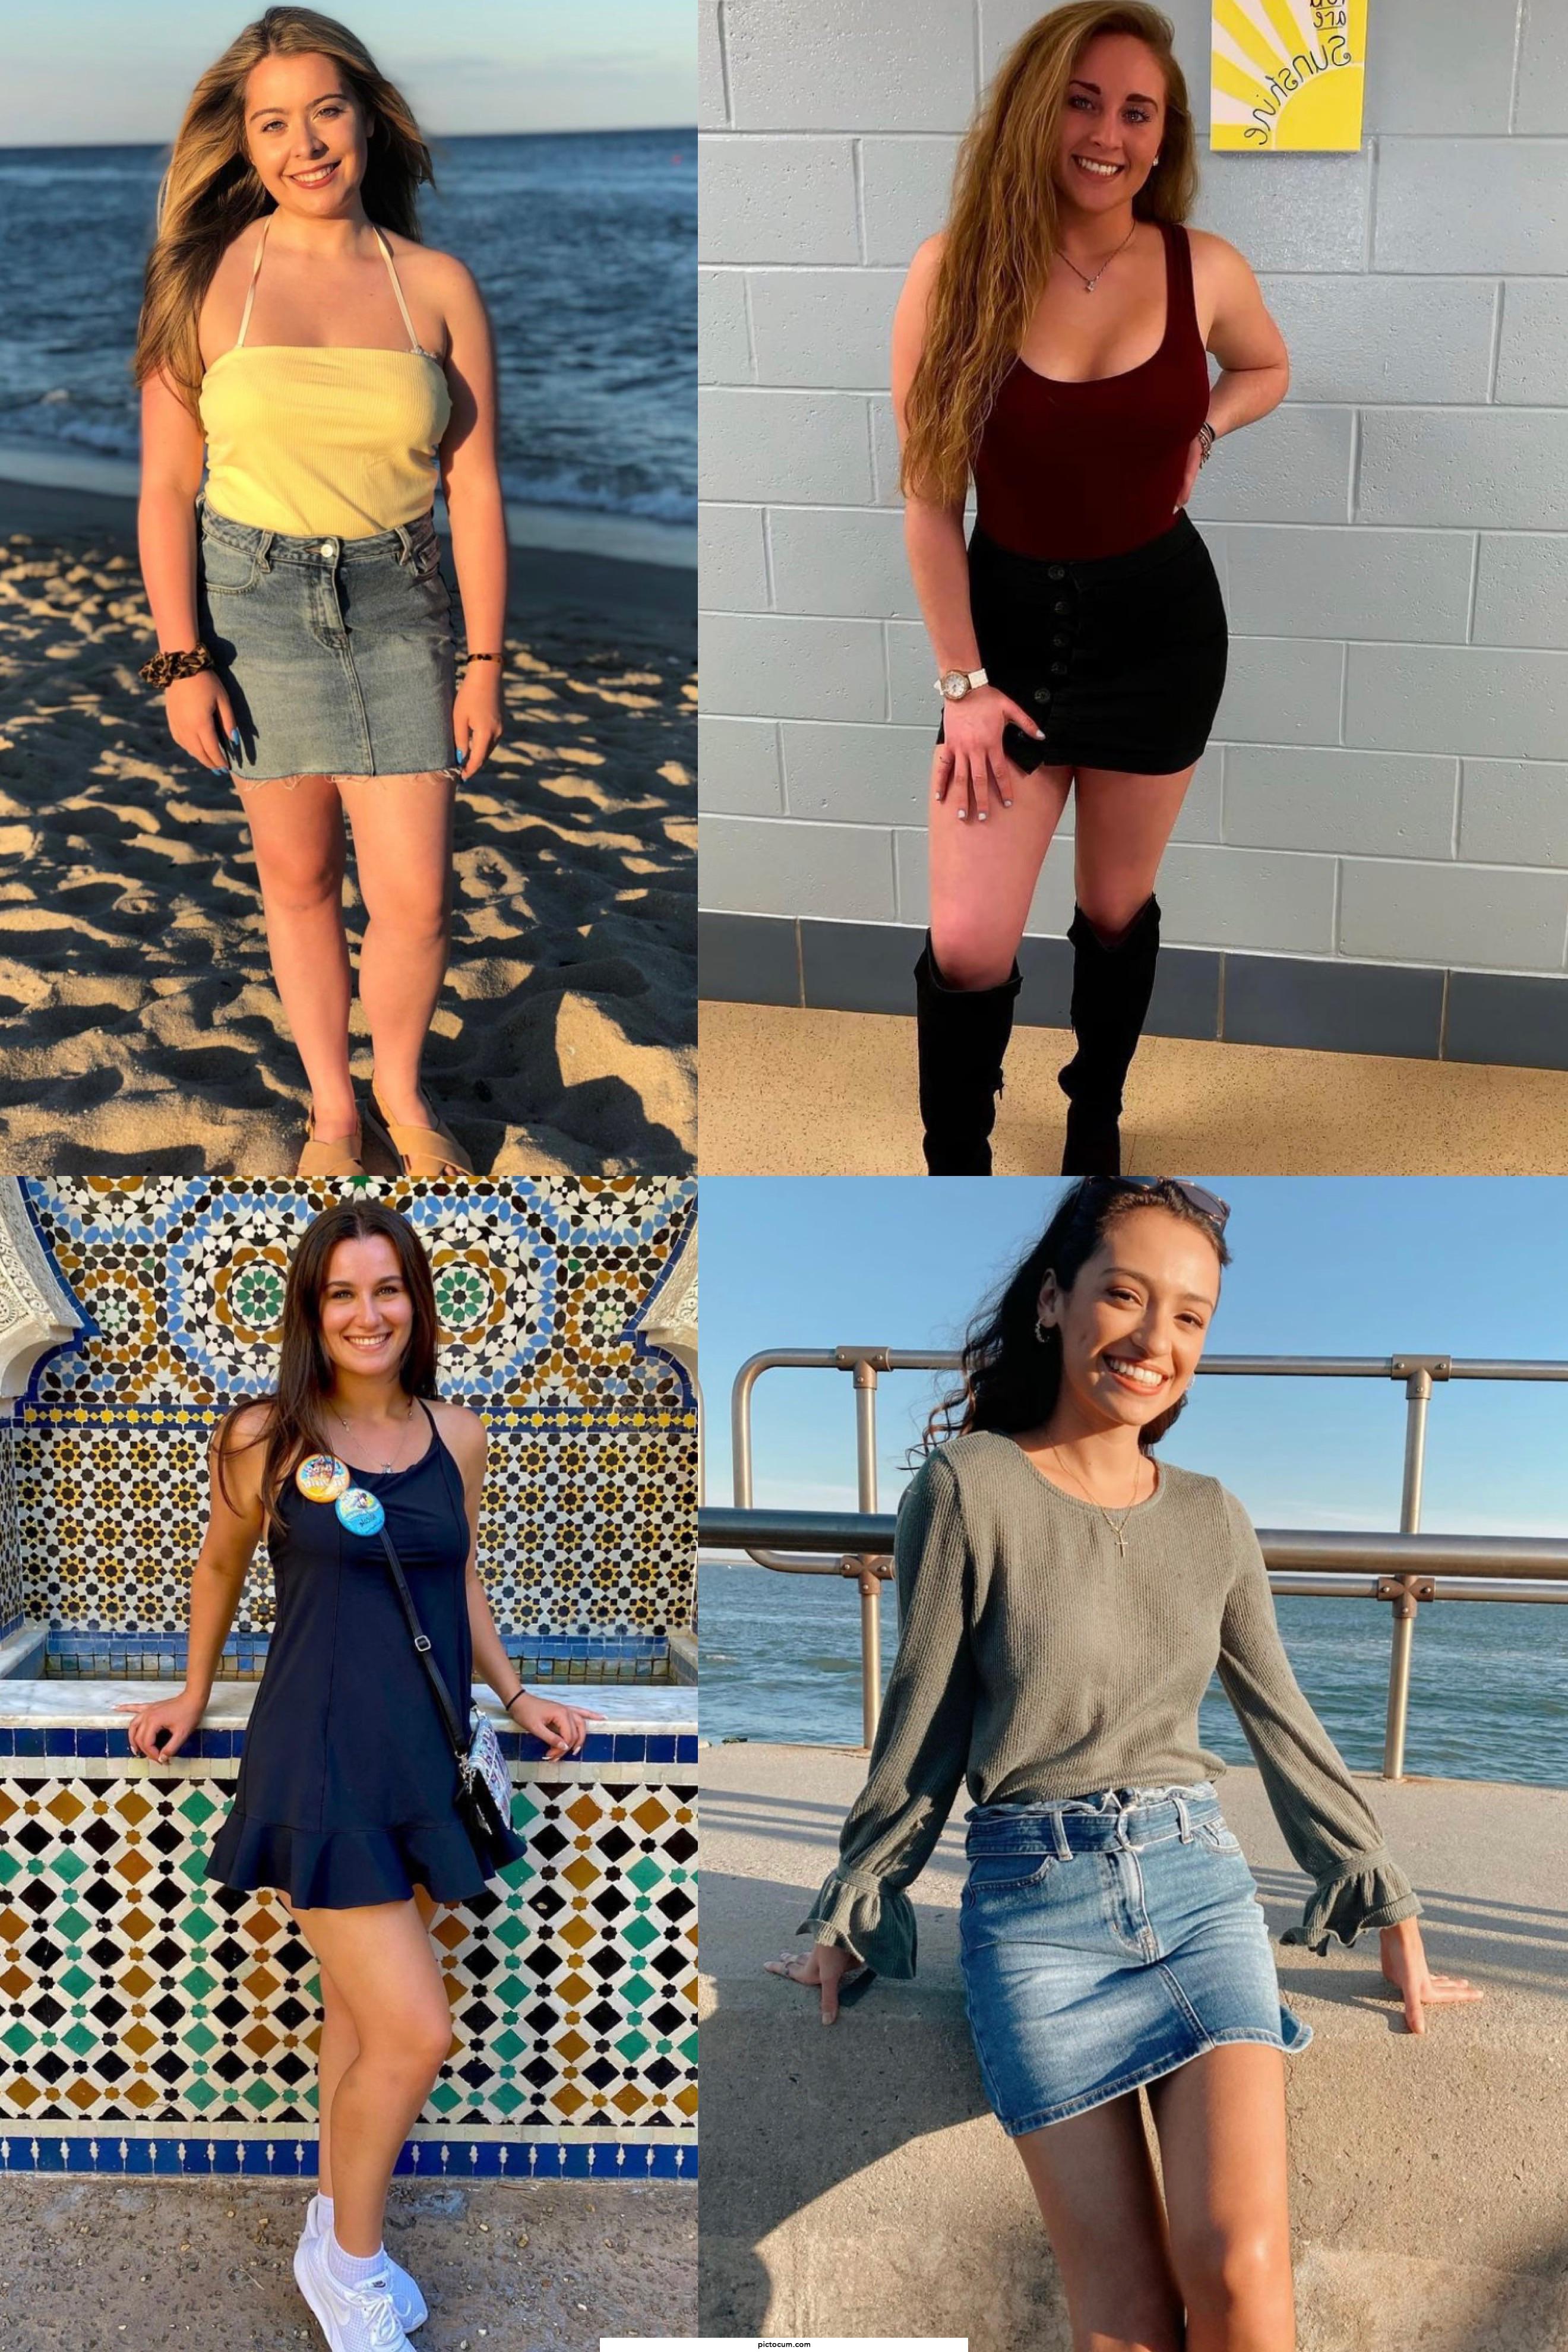 Which of these four skirt wearing babes is hottest?